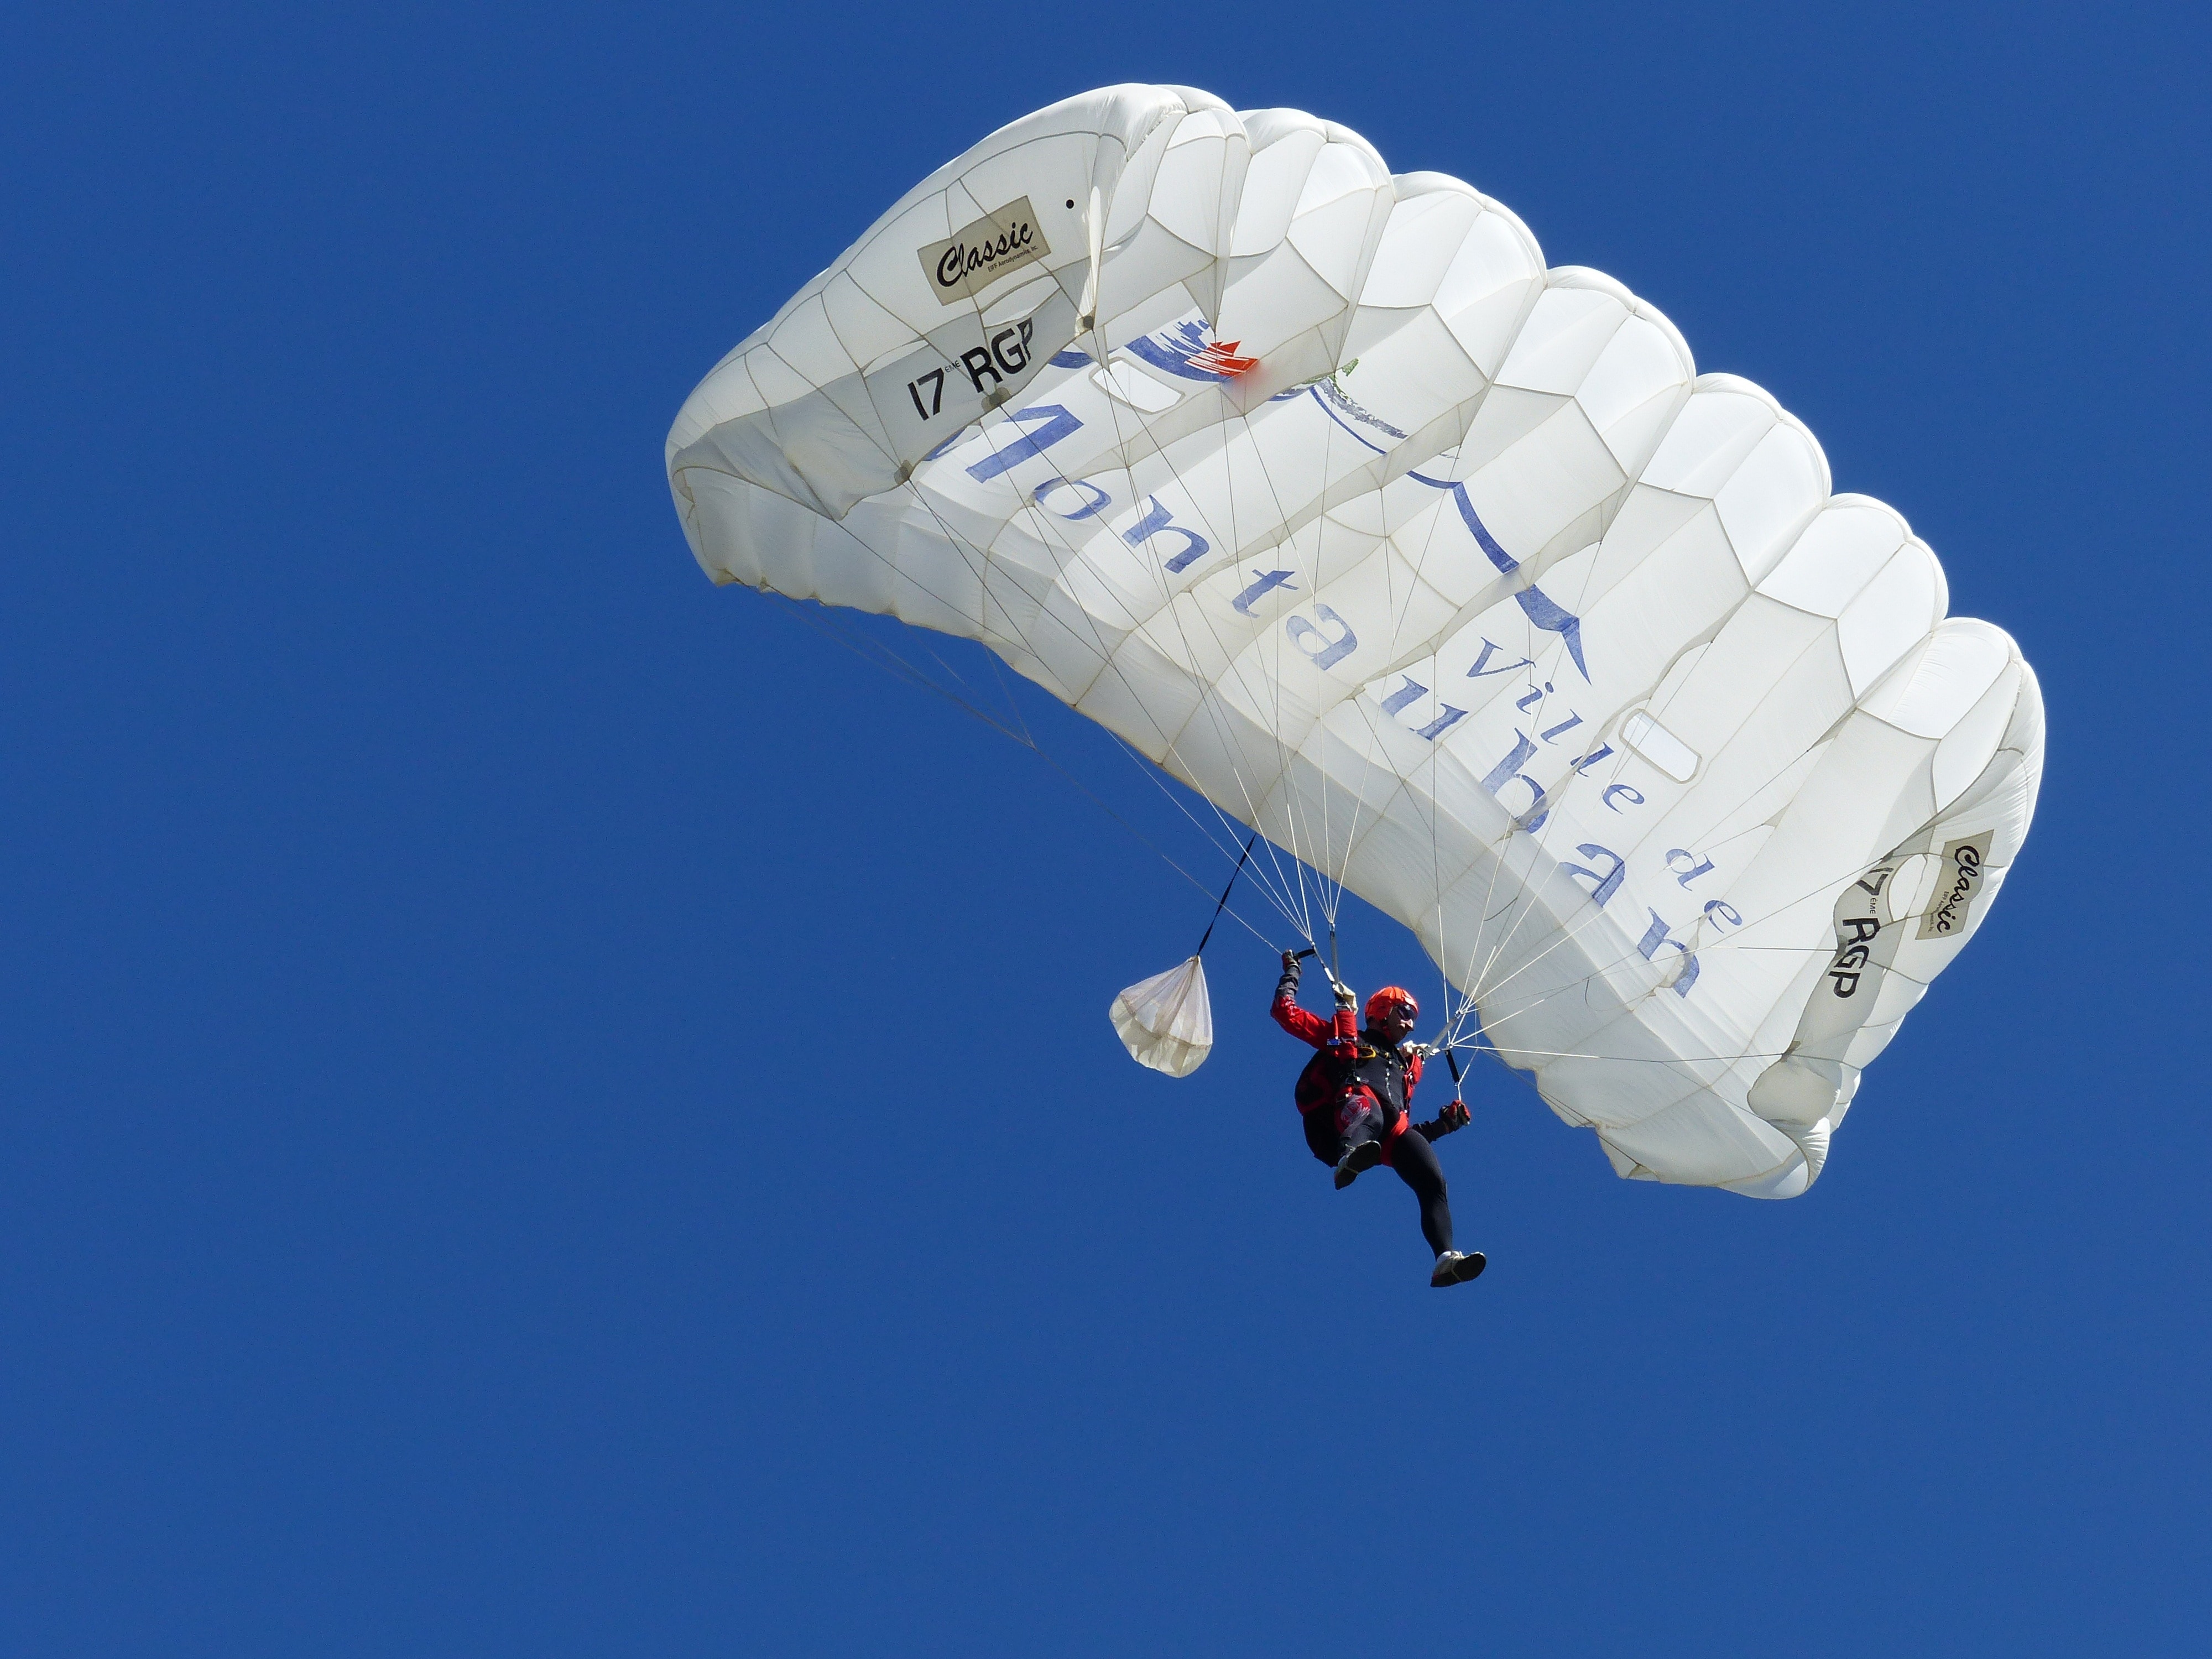 Competition, Skydiving, Descent, Sport, blue, mid-air